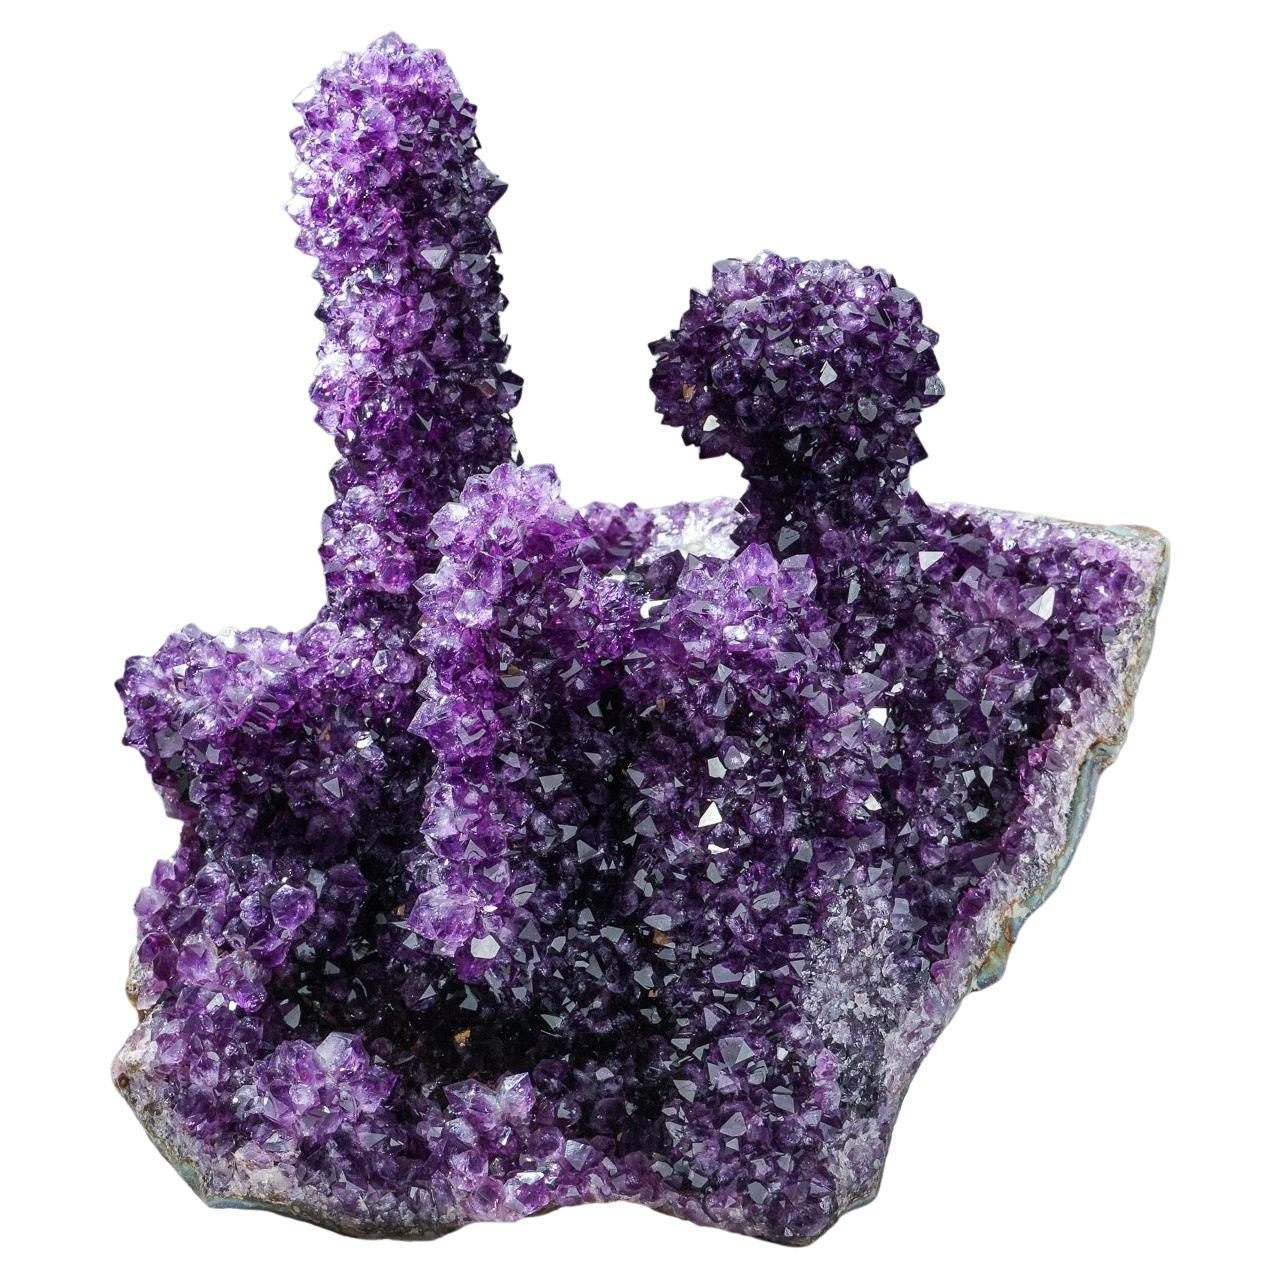 Amethyst Geode Stalactite Crystal Cluster from Uruguay (7" Tall, 13 lbs.)